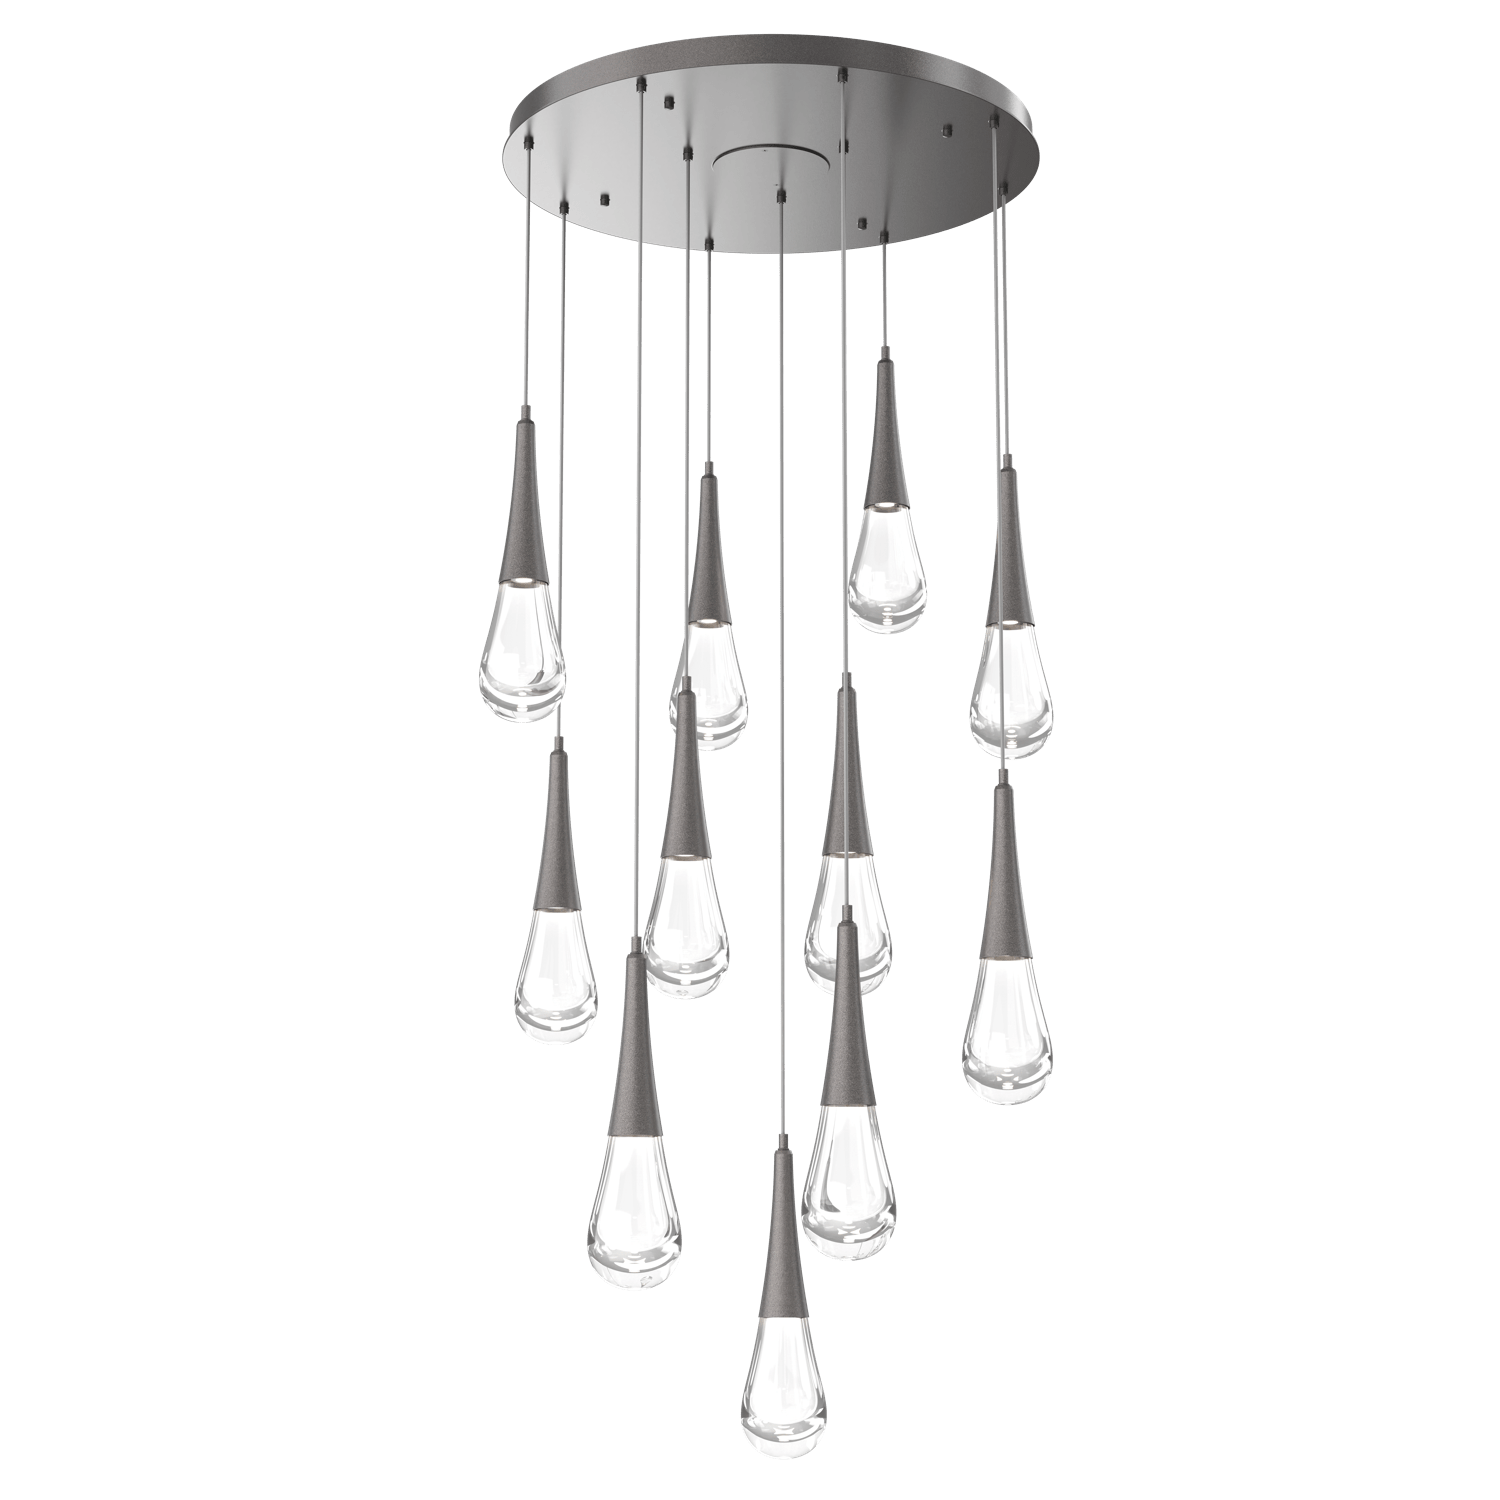 CHB0078-11-GP-Hammerton-Studio-Raindrop-11-light-round-pendant-chandelier-with-graphite-finish-and-clear-blown-glass-shades-and-LED-lamping